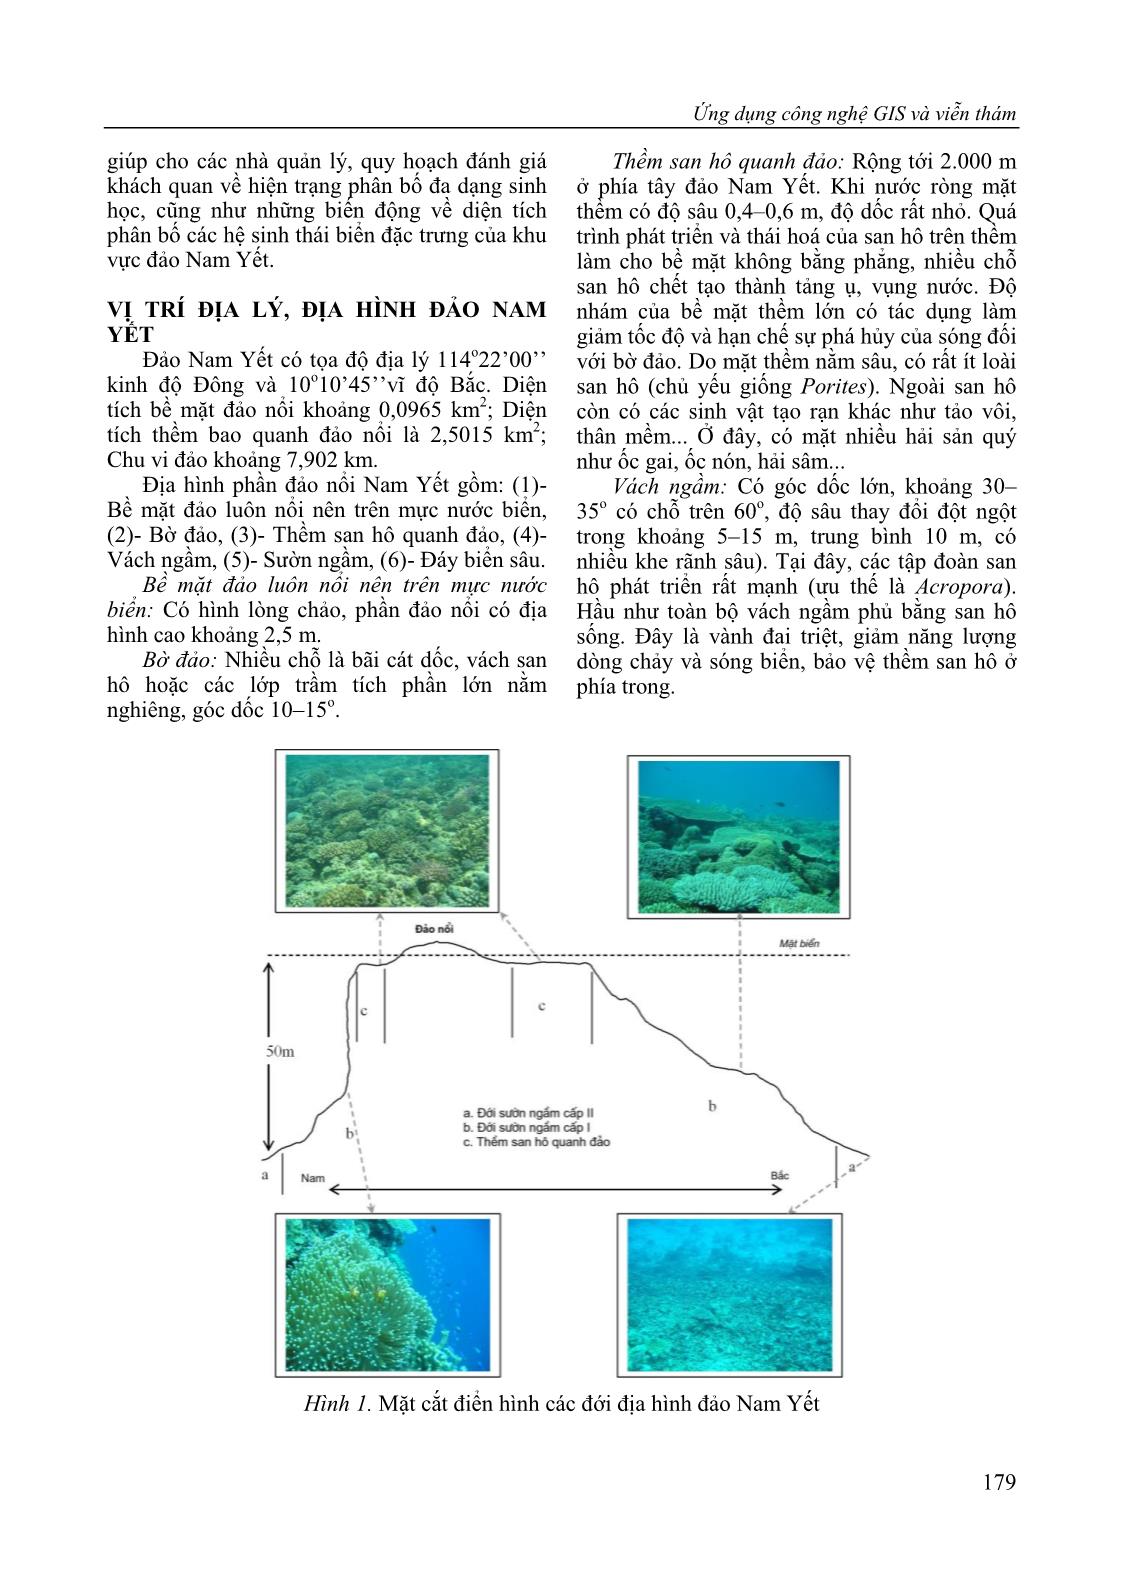 Study on spatial distribution of coral reefs in Nam Yet island by using GIS and remote sensing techniques trang 3